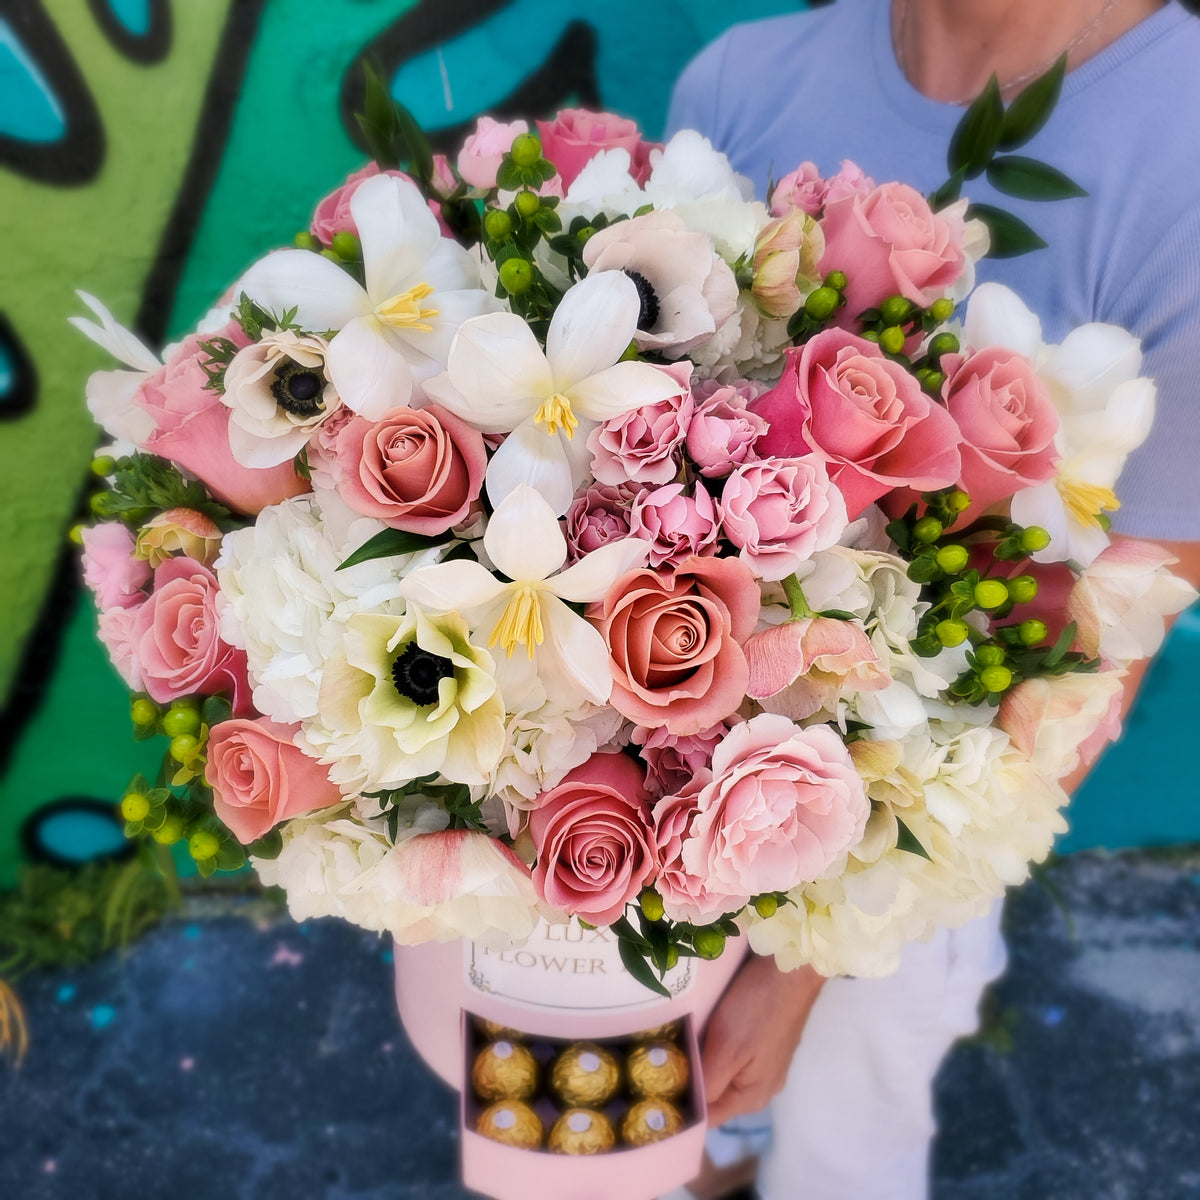 Forever Roses Heart Bouquet - Pink / White in Las Vegas, NV